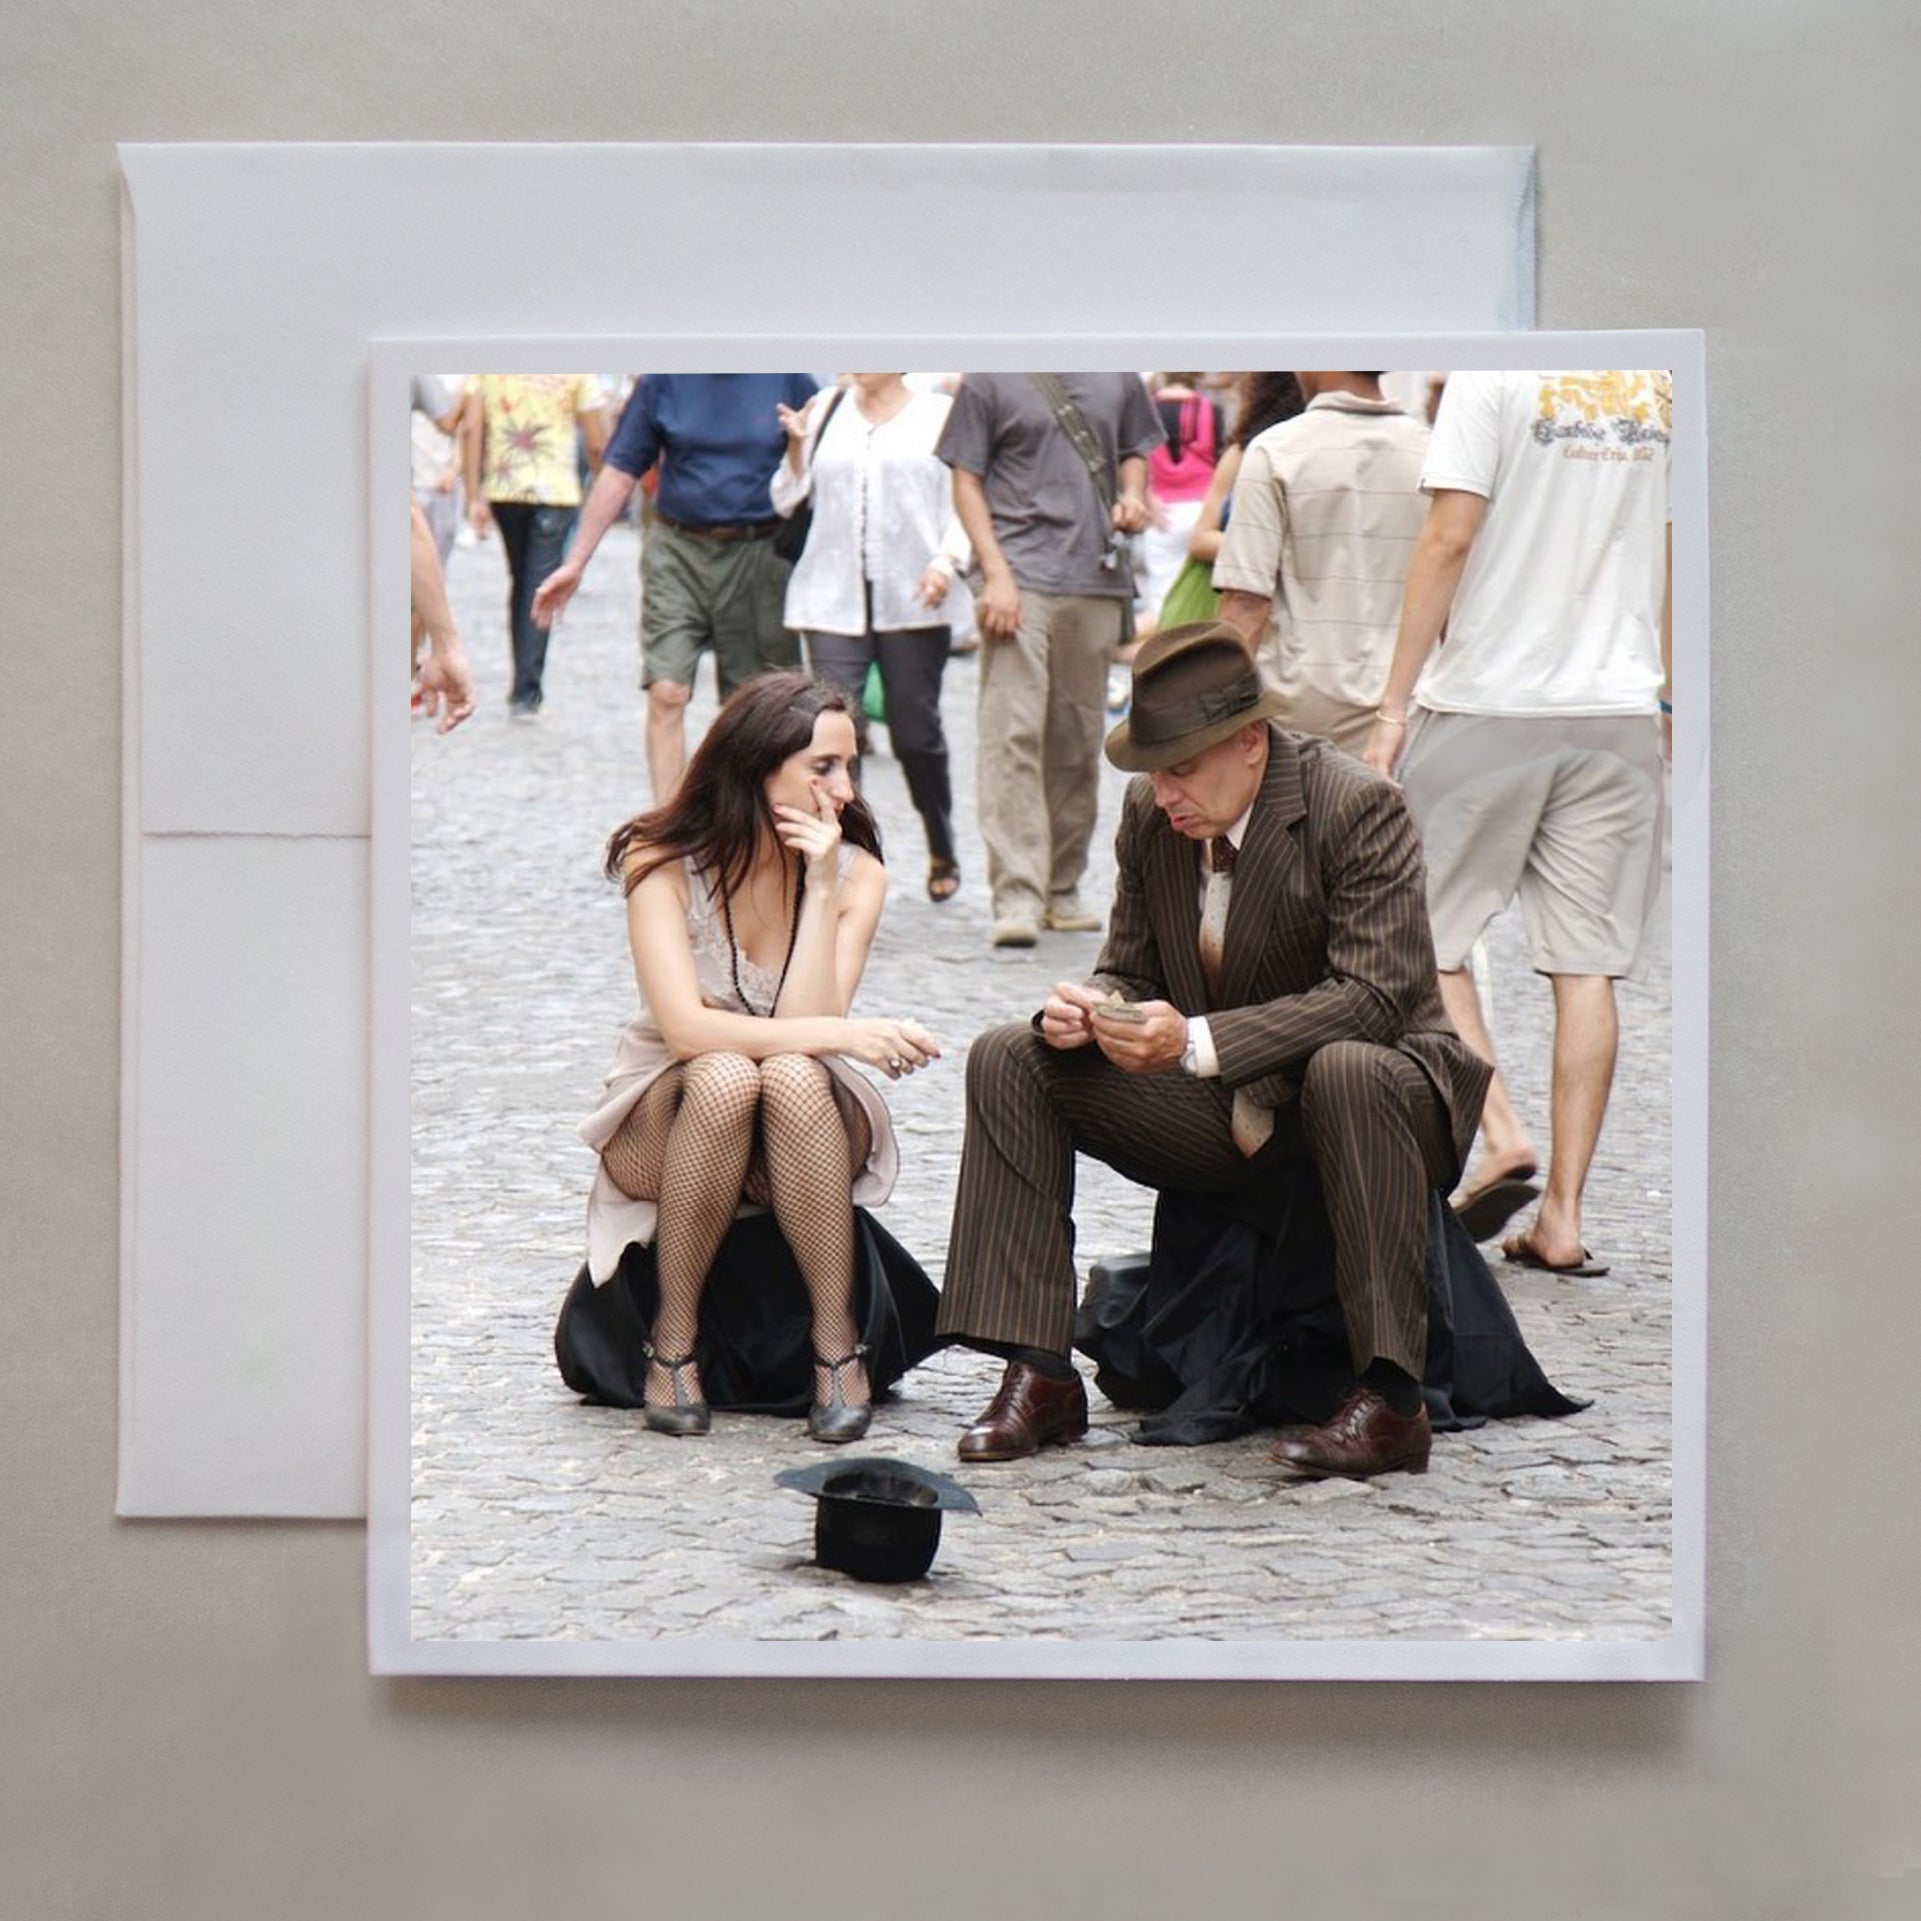 This photo greeting card shows two street tango dancers dividing their earnings outside a market in Argentina. © Caley Taylor Photography